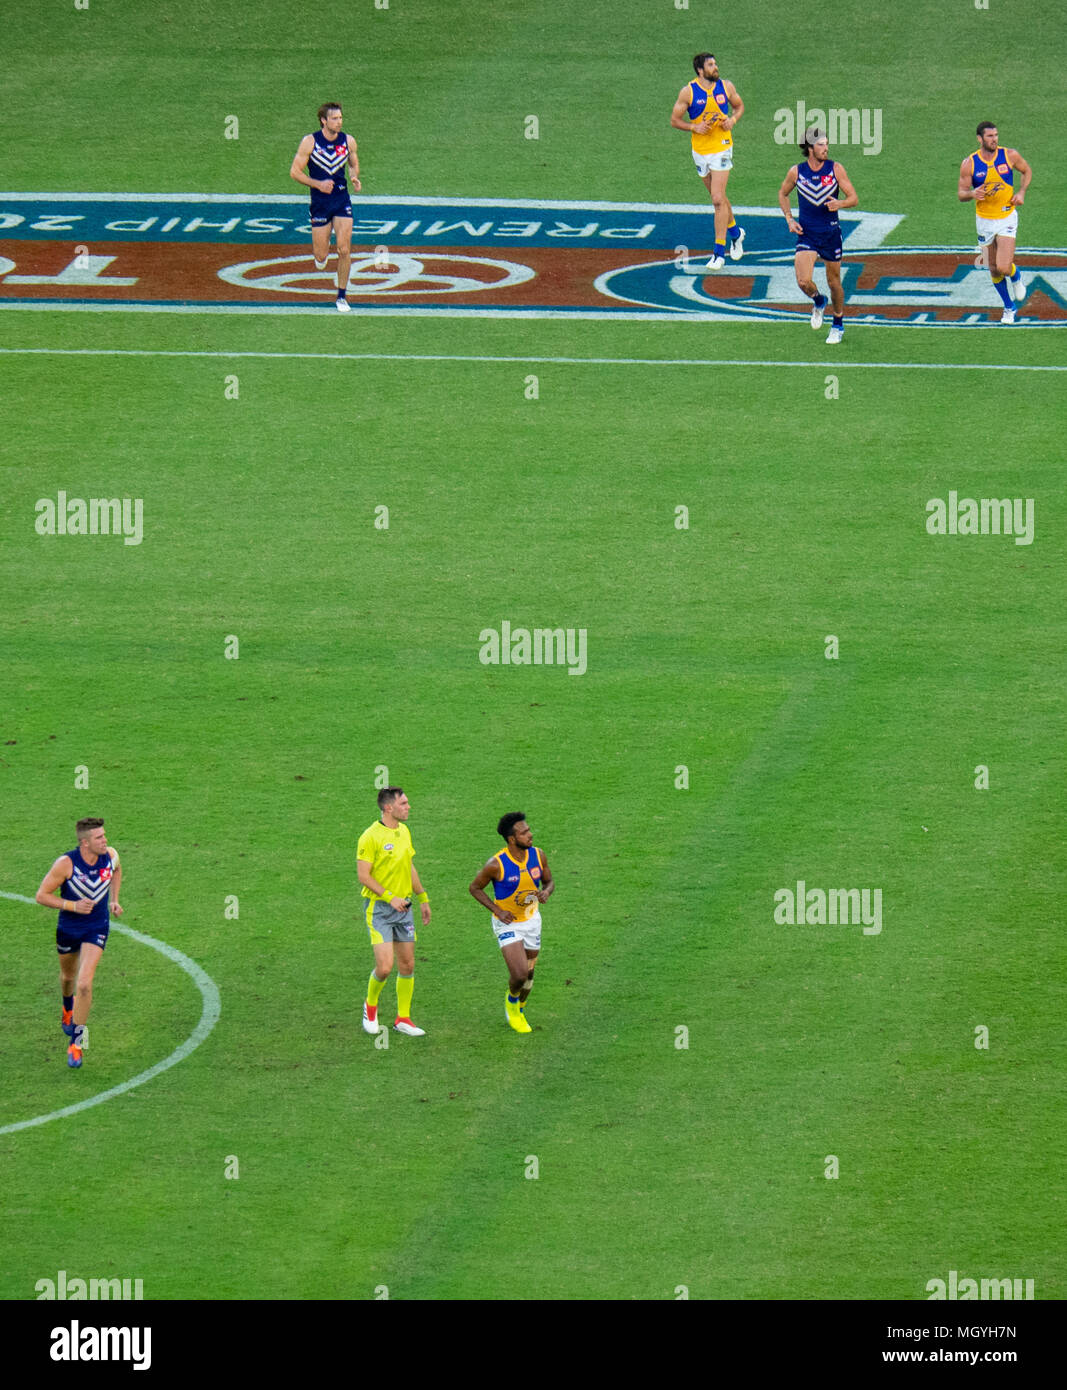 The first derby AFL, Australian Rules Football game between Fremantle Dockers and West Coast Eagles at Optus Stadium, Perth WA. Stock Photo